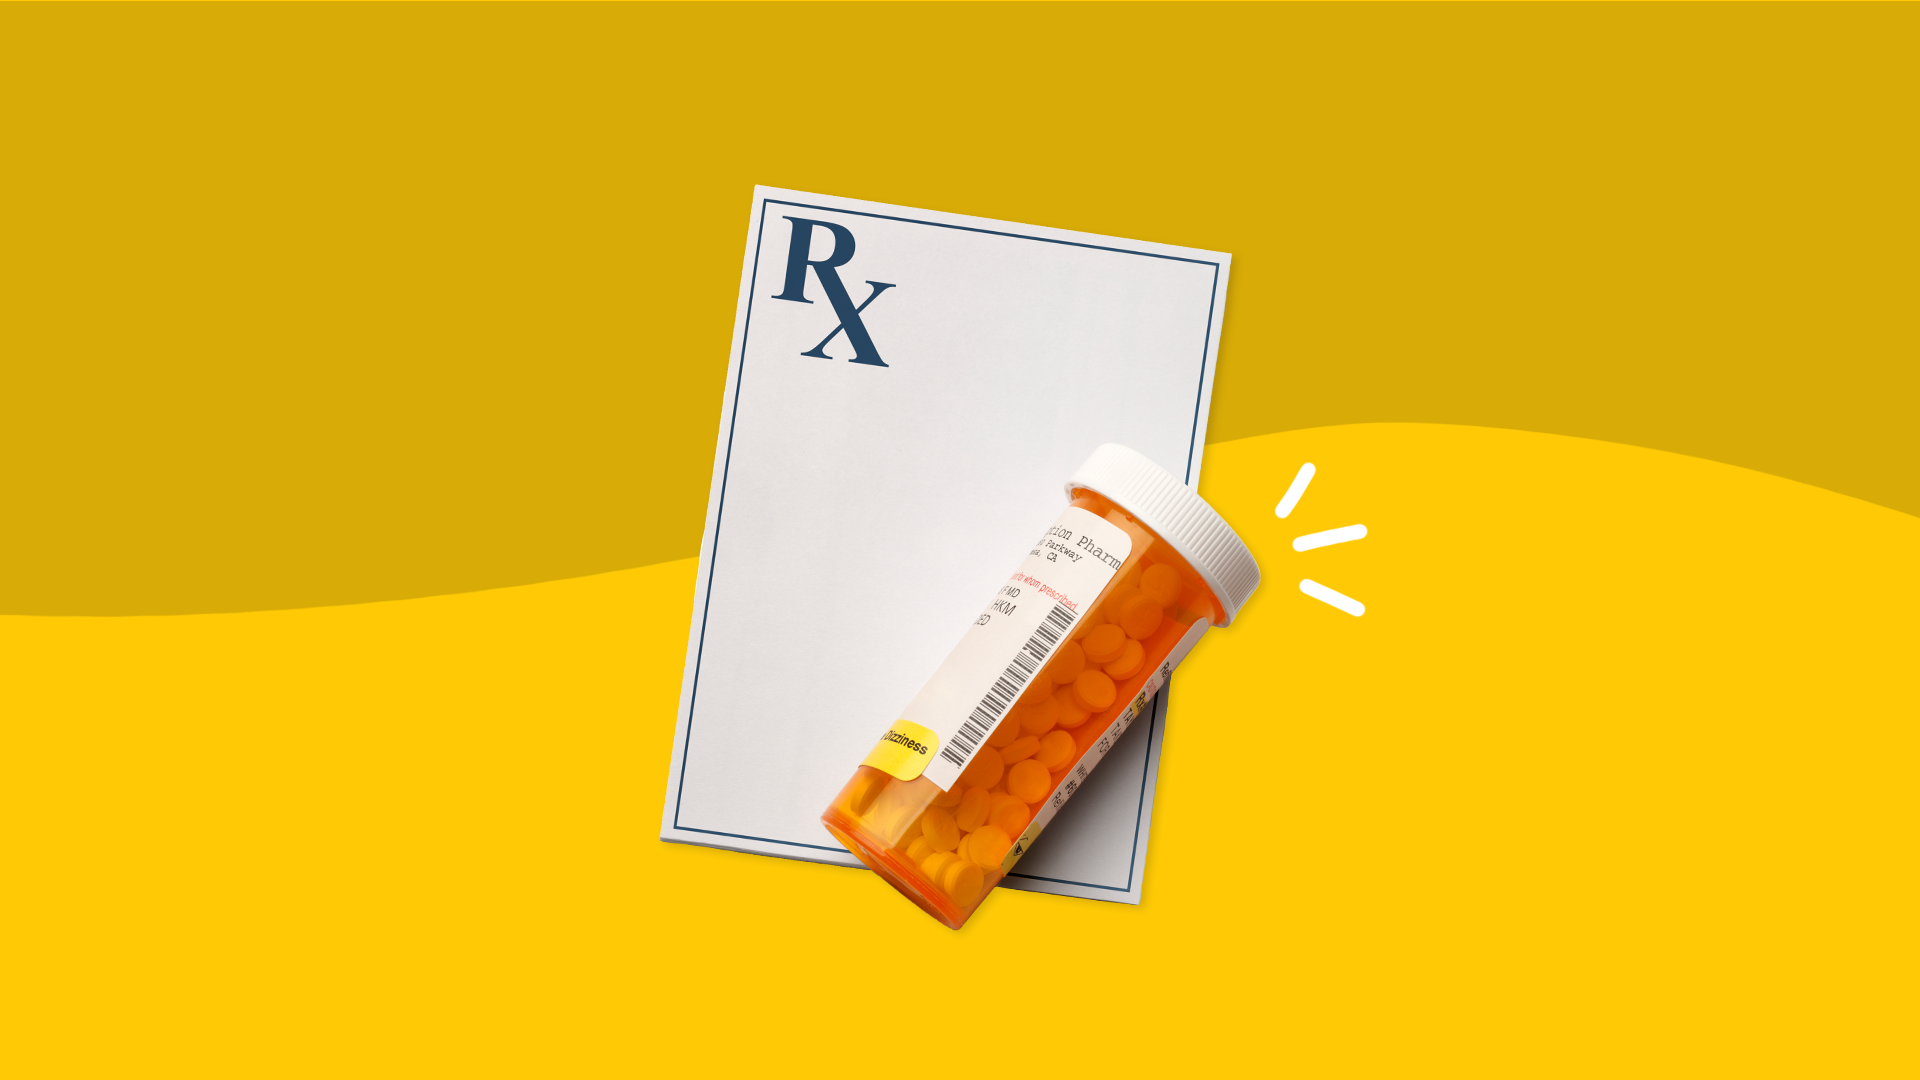 Rx pad and pill bottle: Side effects of Muse medication